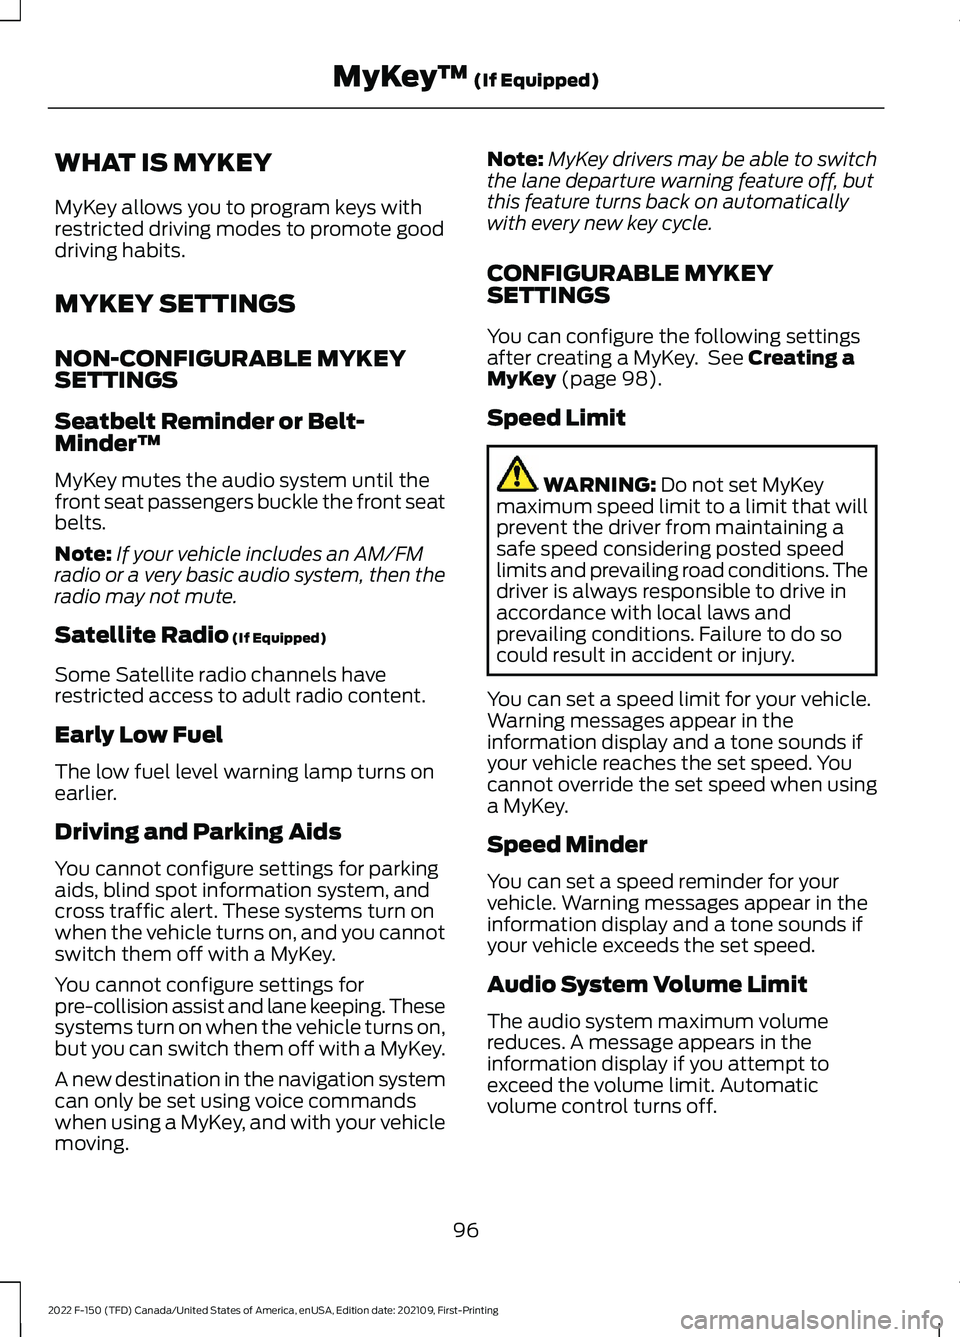 FORD F-150 2022 Owners Guide WHAT IS MYKEY
MyKey allows you to program keys with
restricted driving modes to promote good
driving habits.
MYKEY SETTINGS
NON-CONFIGURABLE MYKEY
SETTINGS
Seatbelt Reminder or Belt-
Minder™
MyKey m